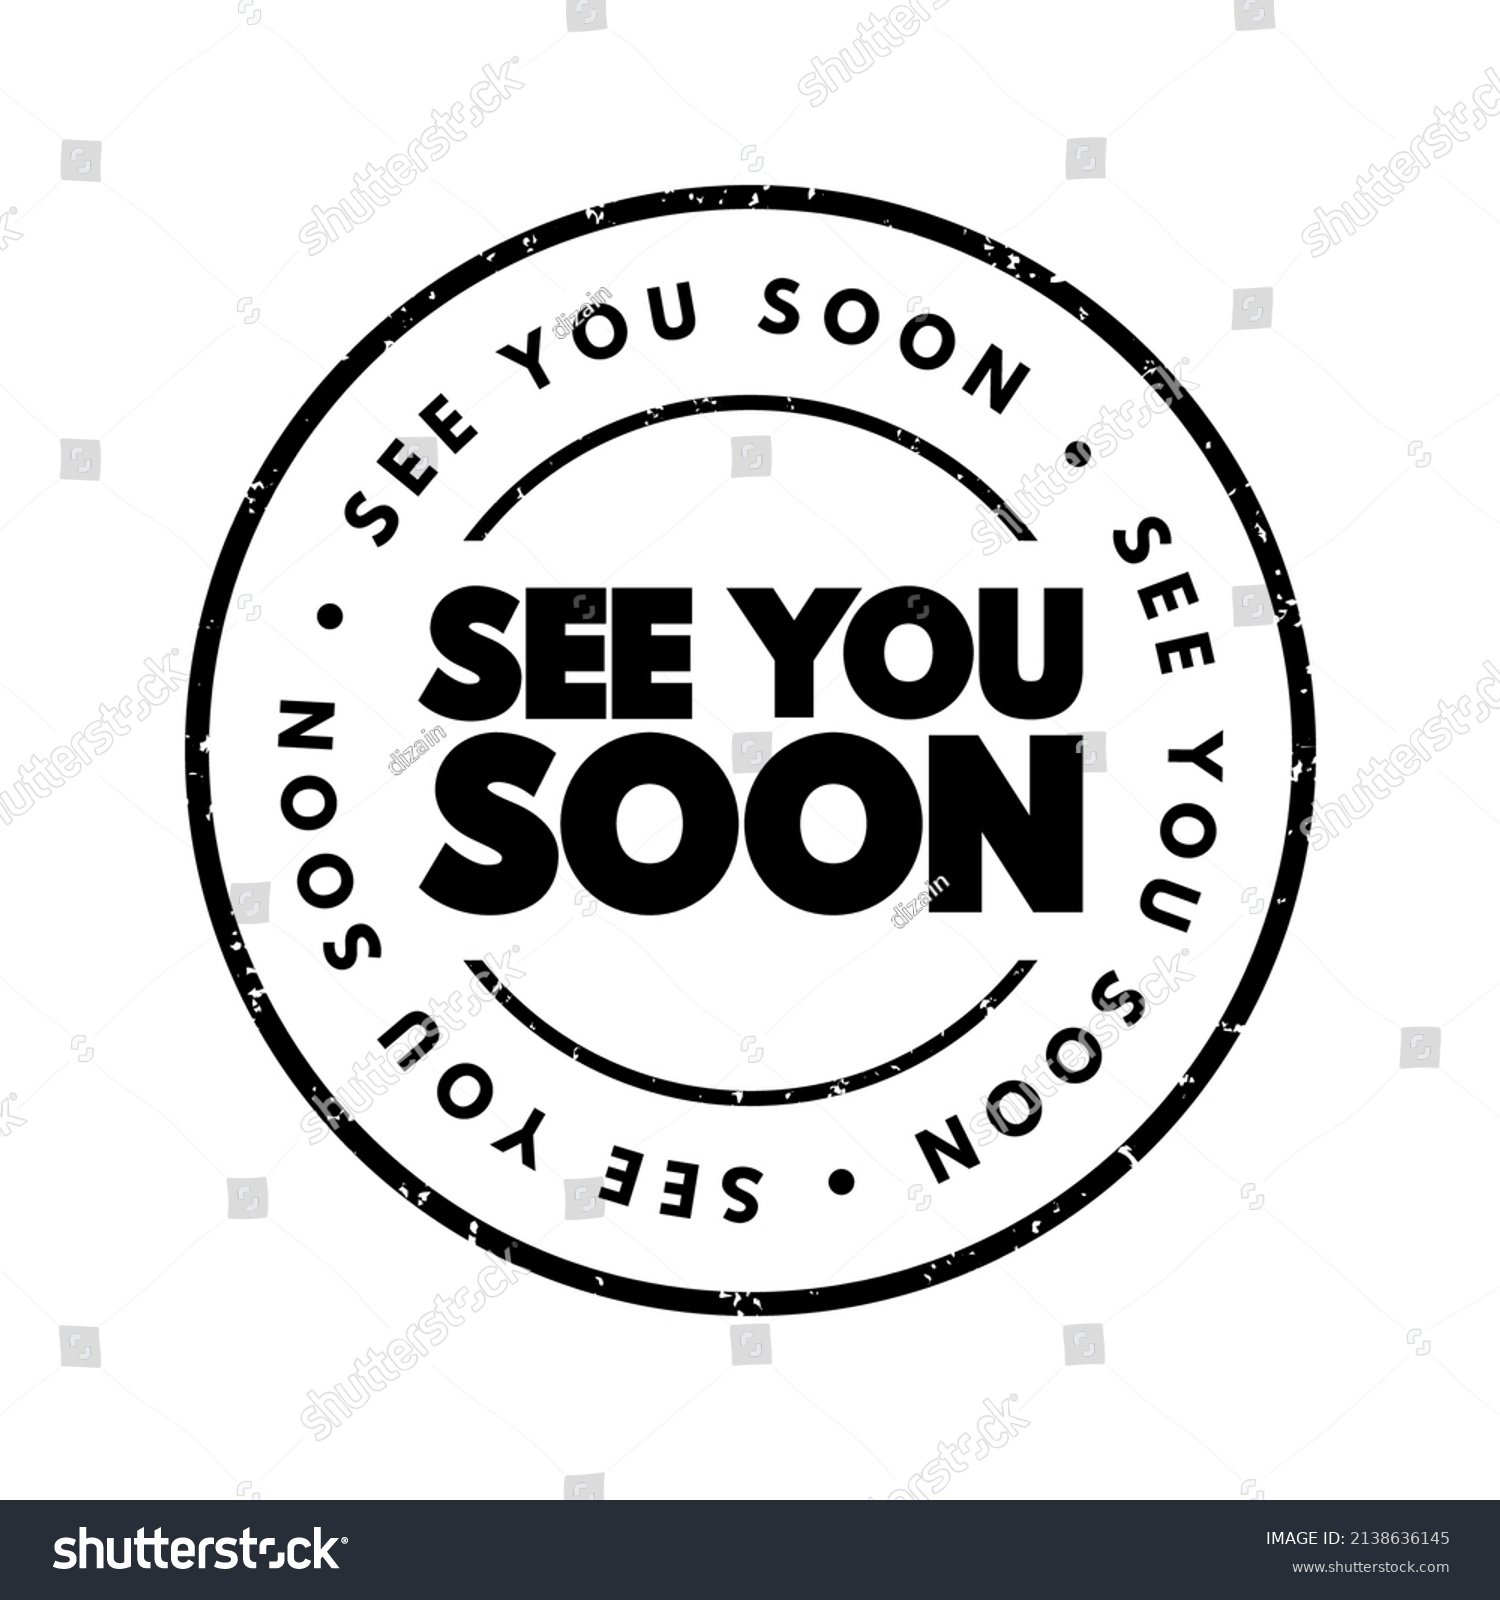 SVG of See You Soon text stamp, concept background svg